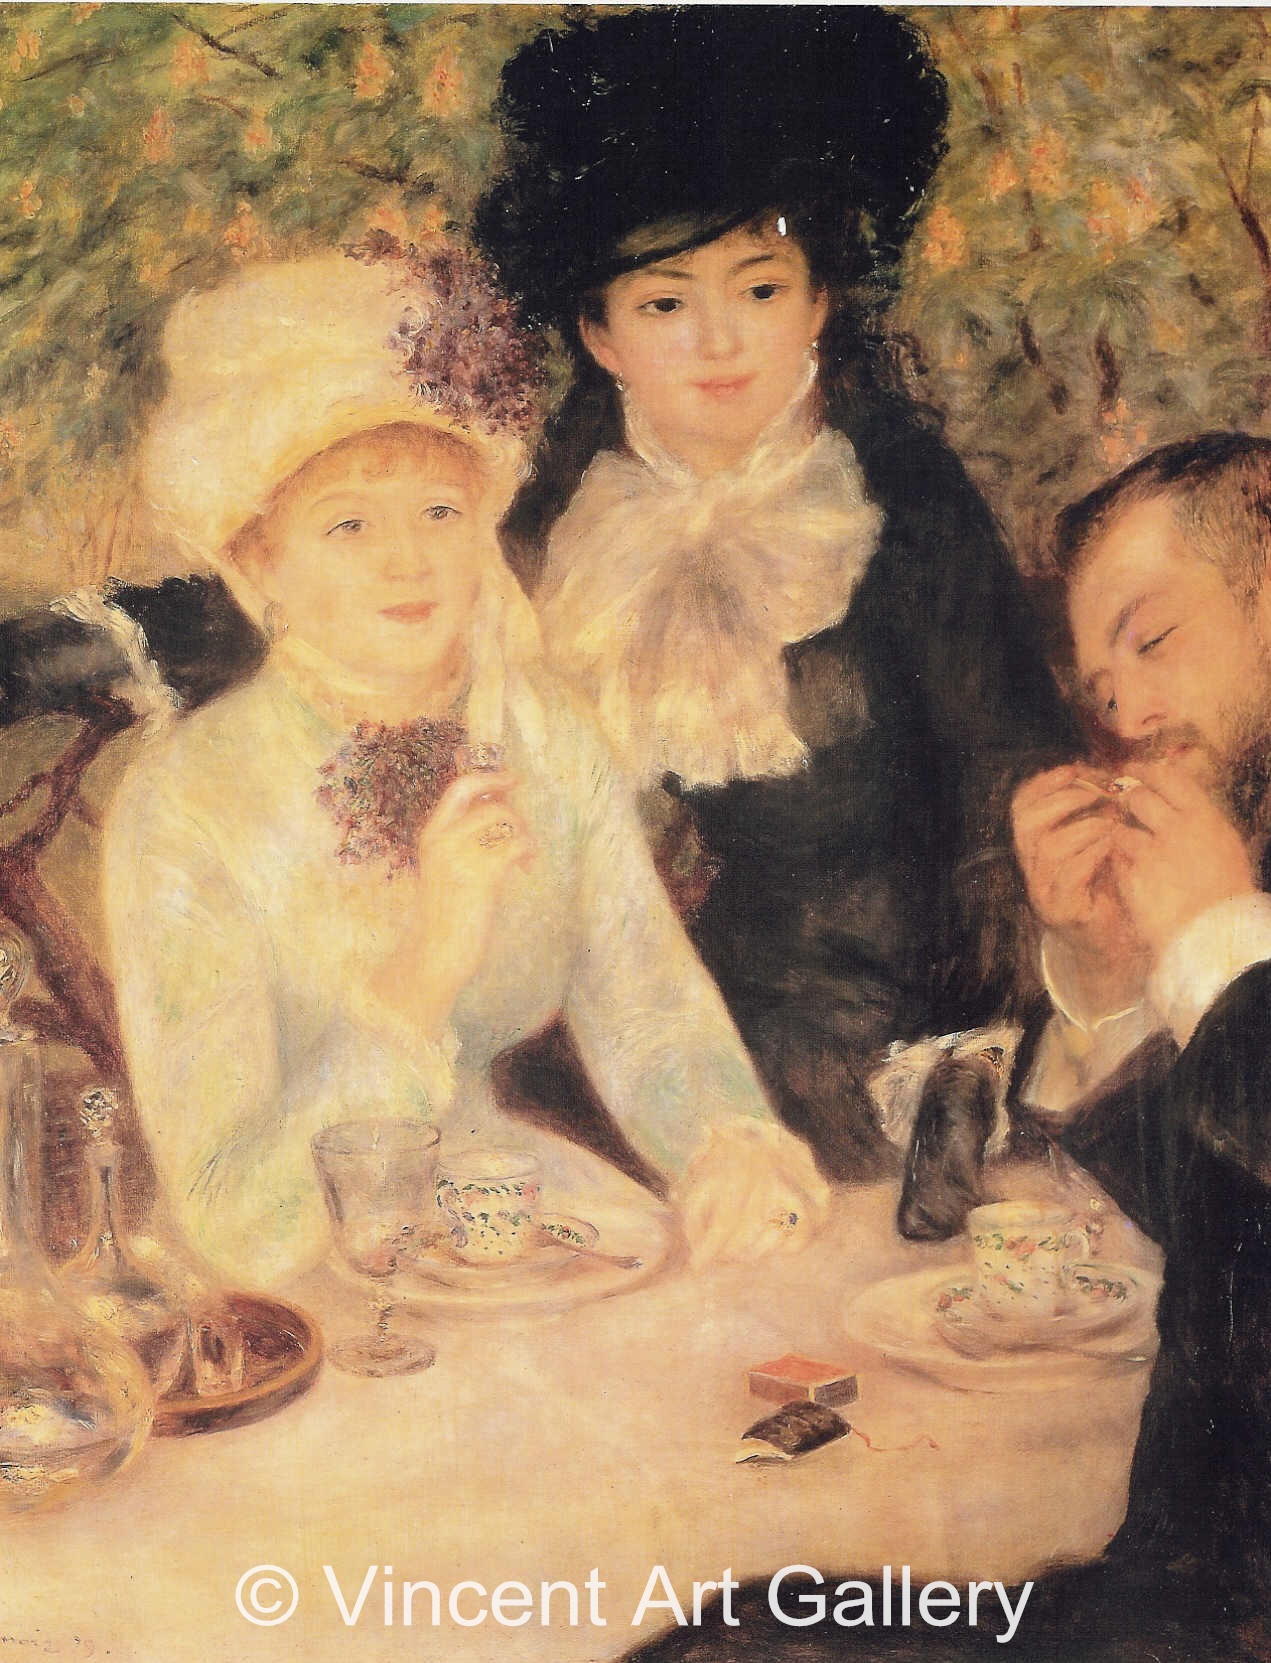 A3064, RENOIR, After the Meal